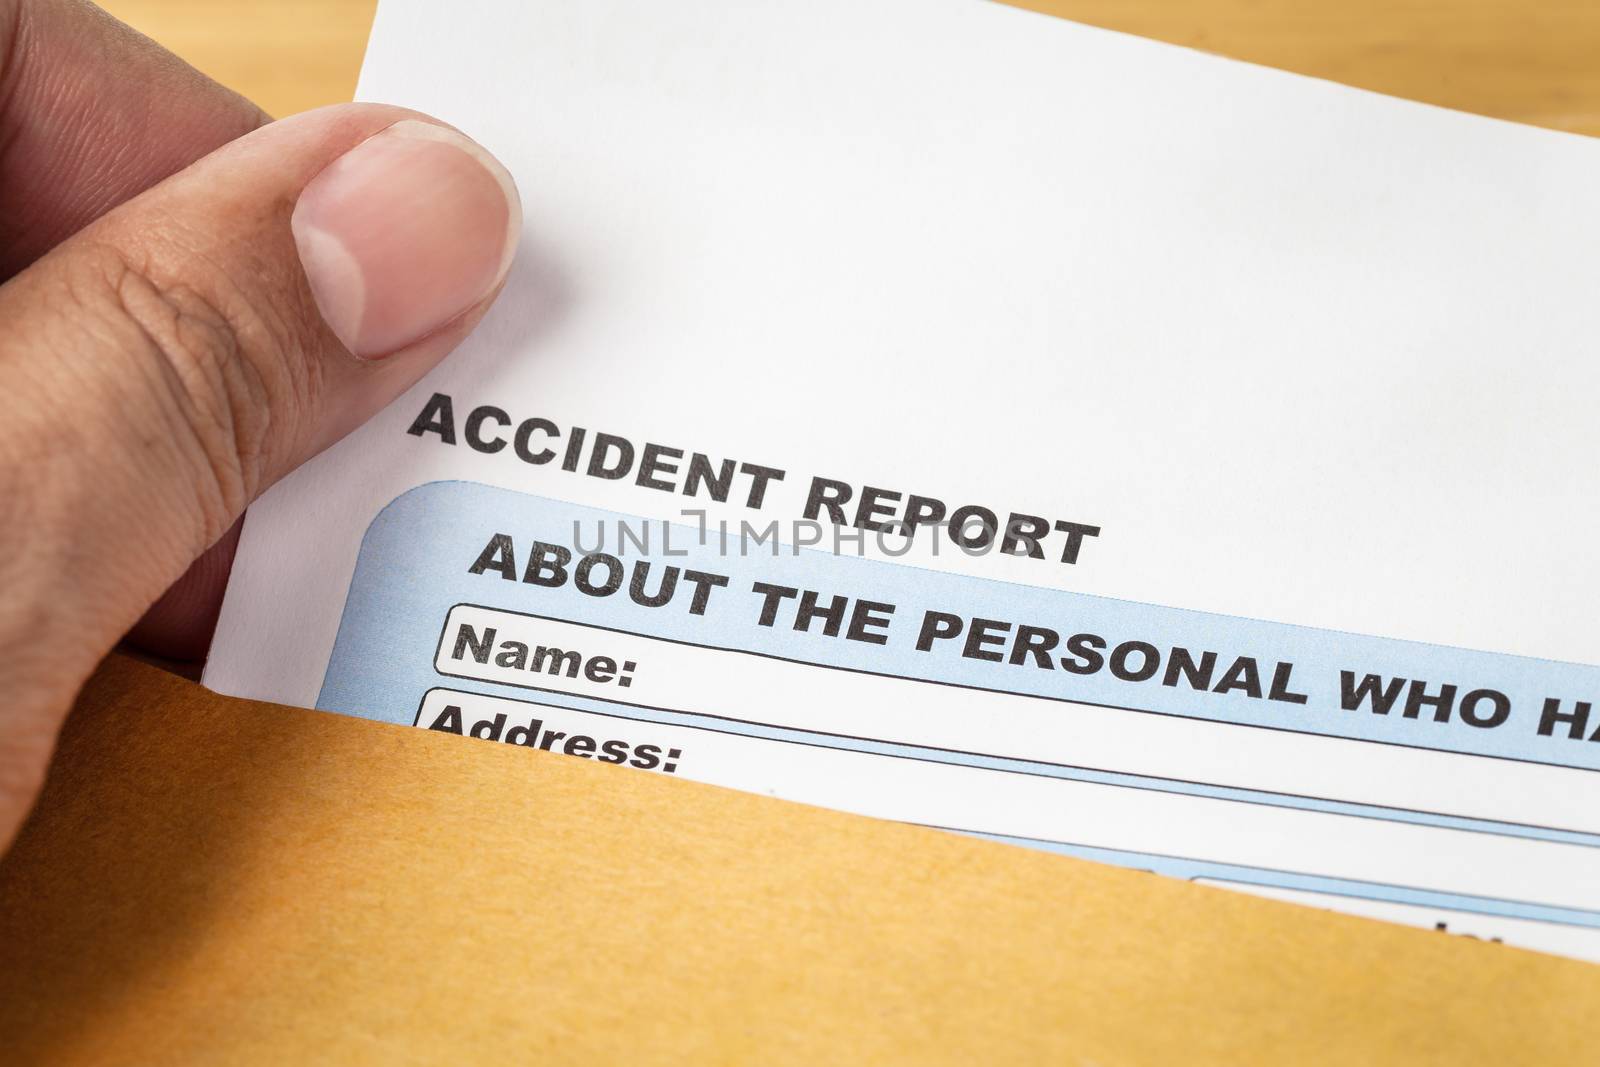 Accident report application form and human hand on brown envelope, business insurance and risk concept; document is mock-up